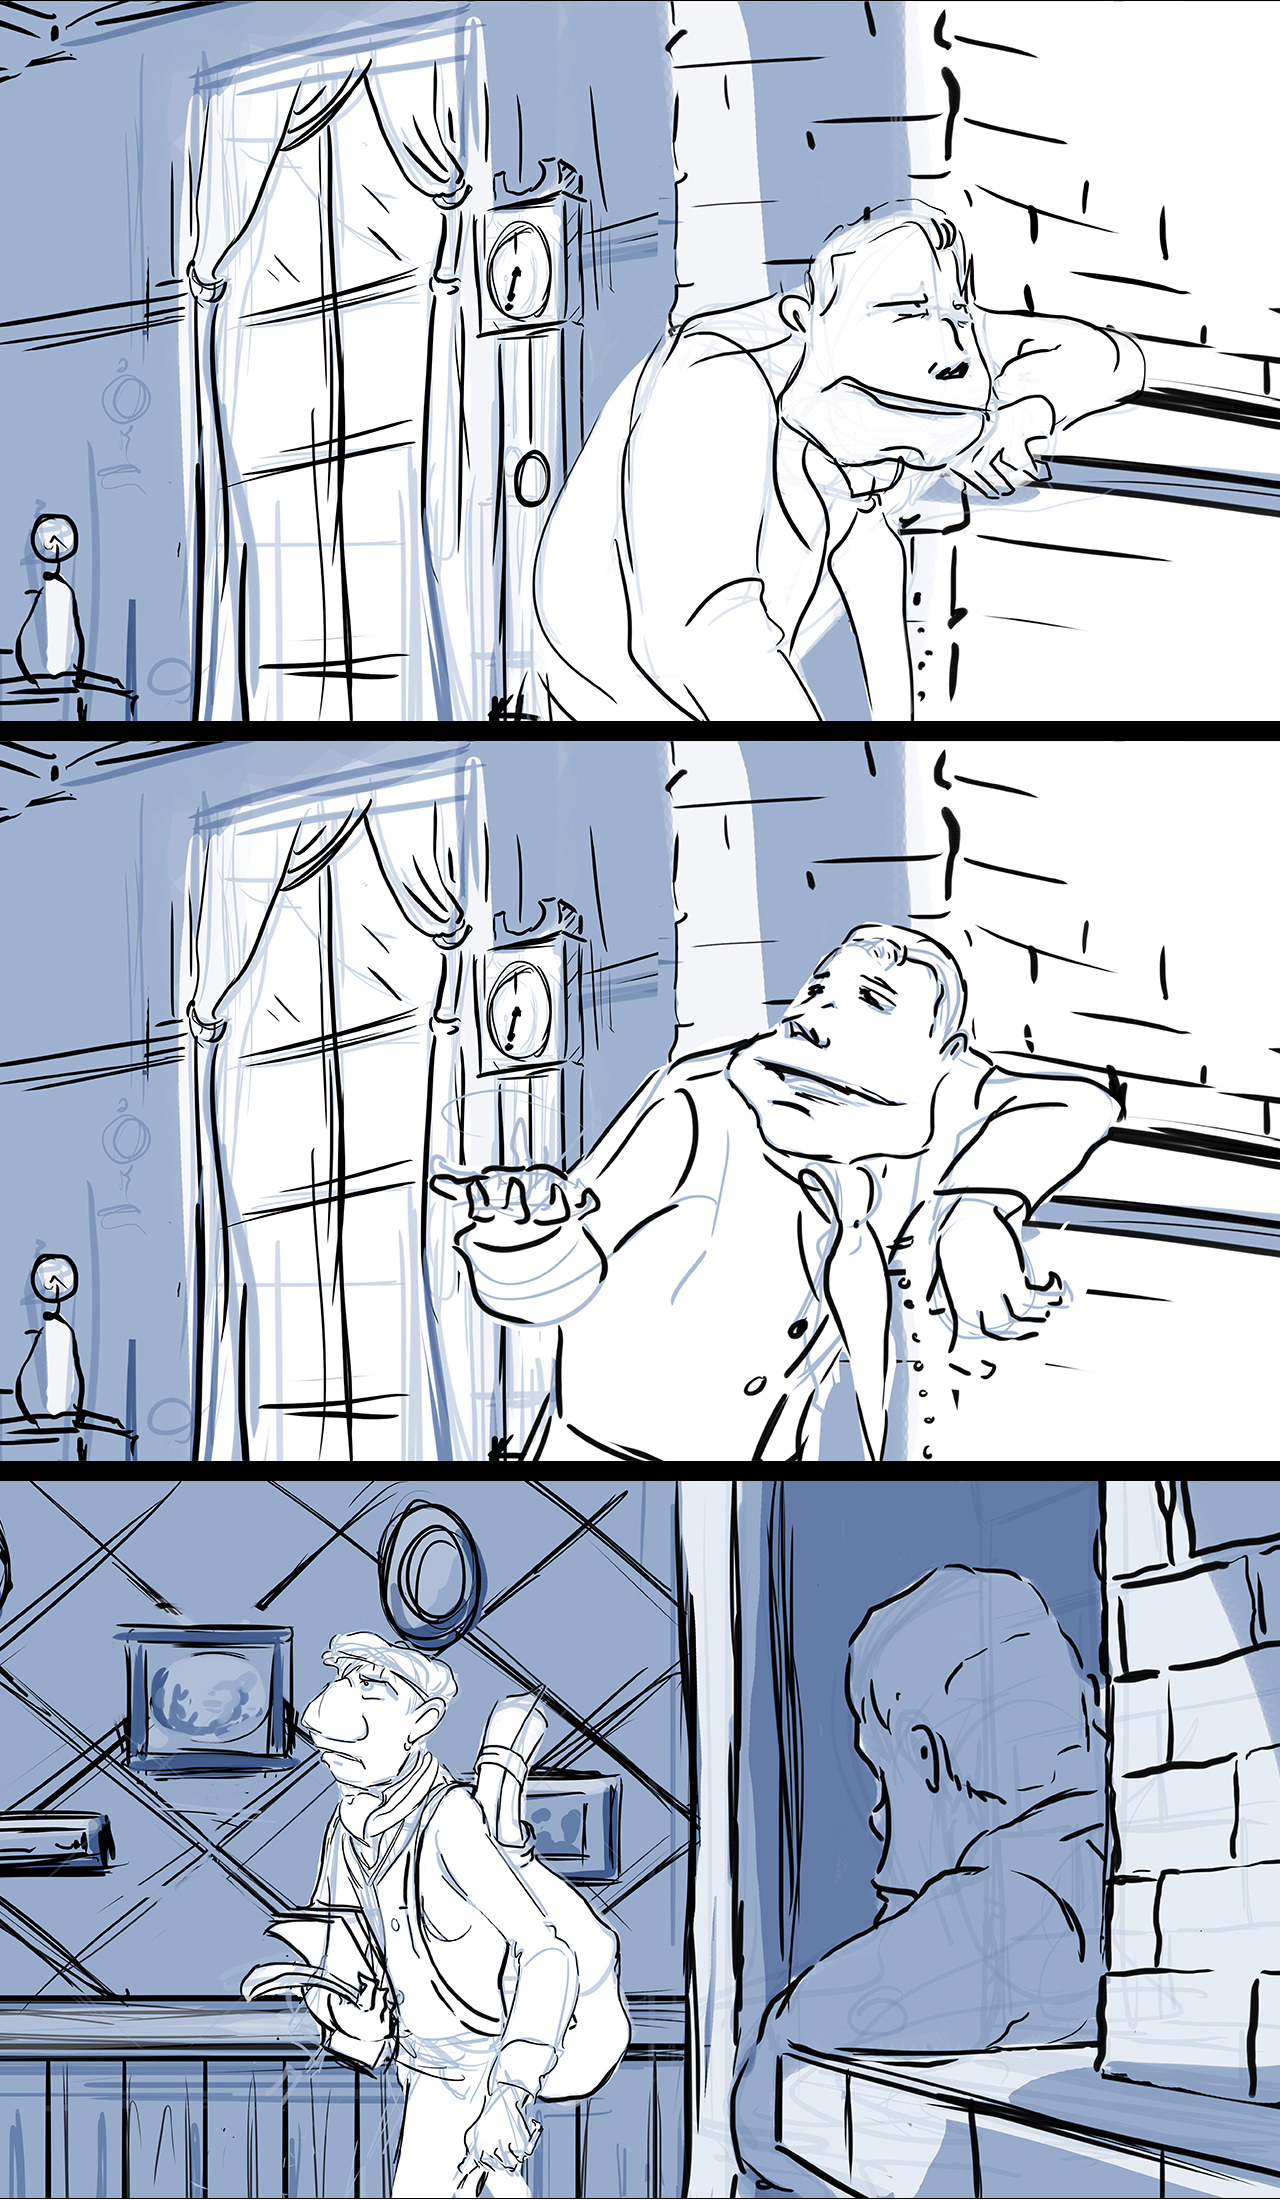 Storyboard sequence from an animated film. Sequence shows the man reveal himself to be very drunk and he falls onto the mantle.  He turns to the younger man, who's just entered, to ask a question.